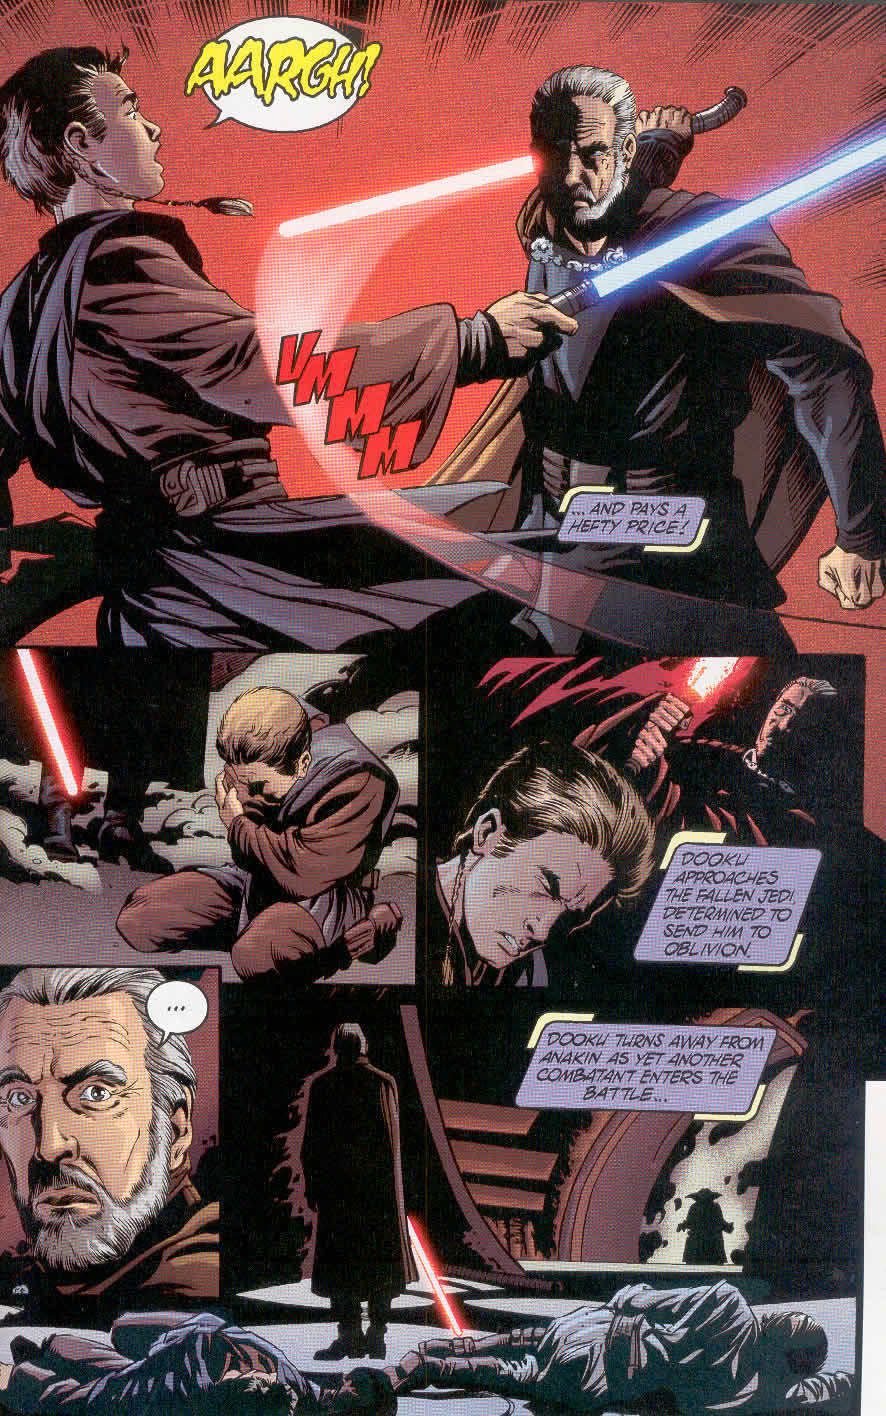 Attack of the Clones comic page with Yoda appearing to face Dooku